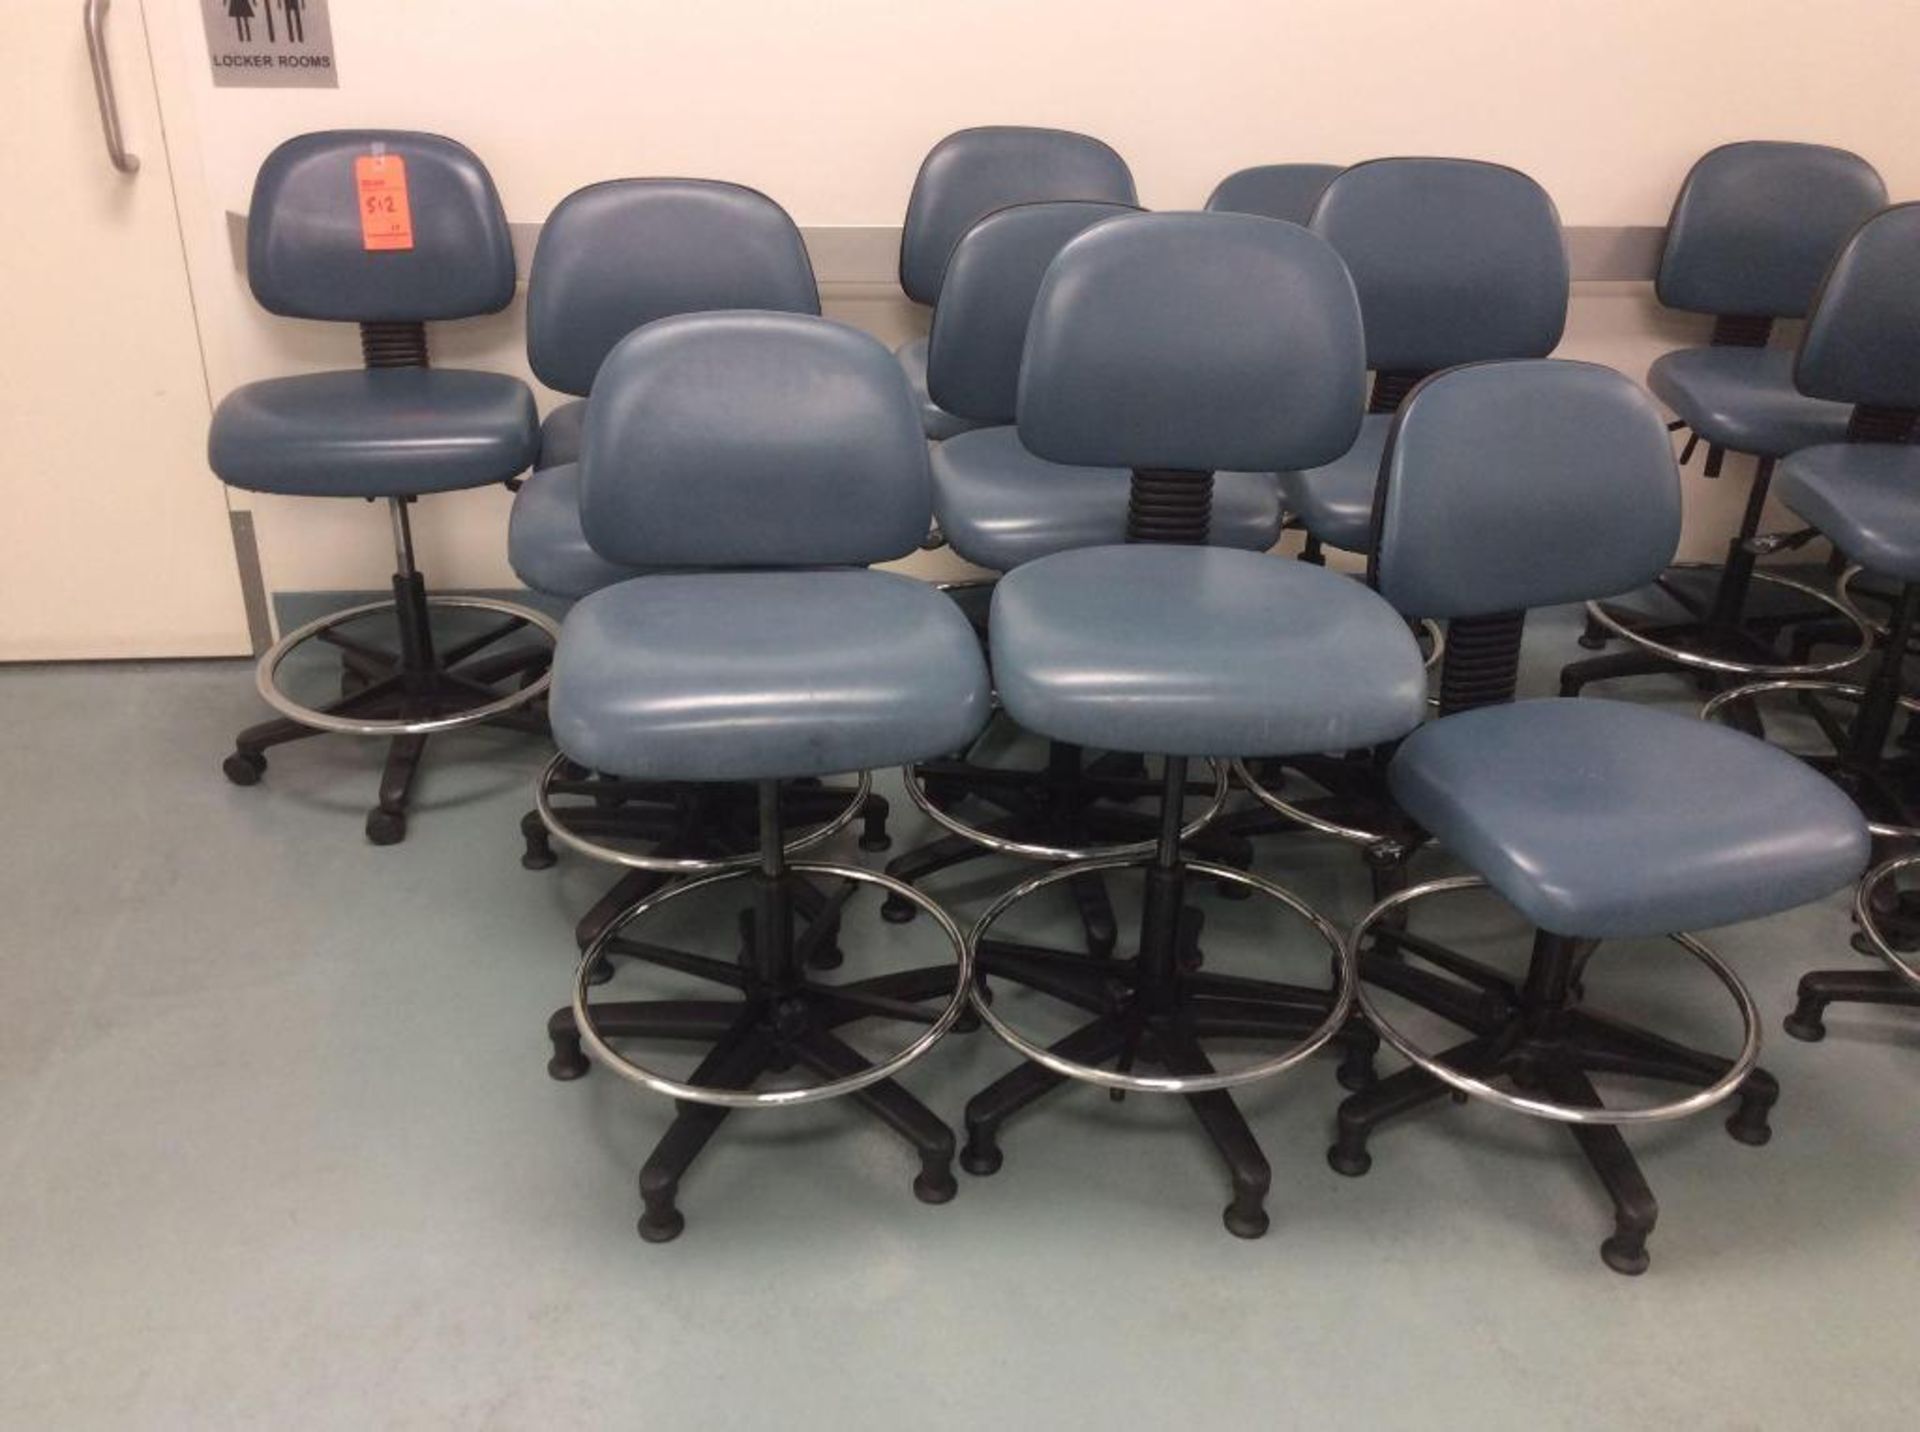 Lot of (10) clean room laboratory chairs